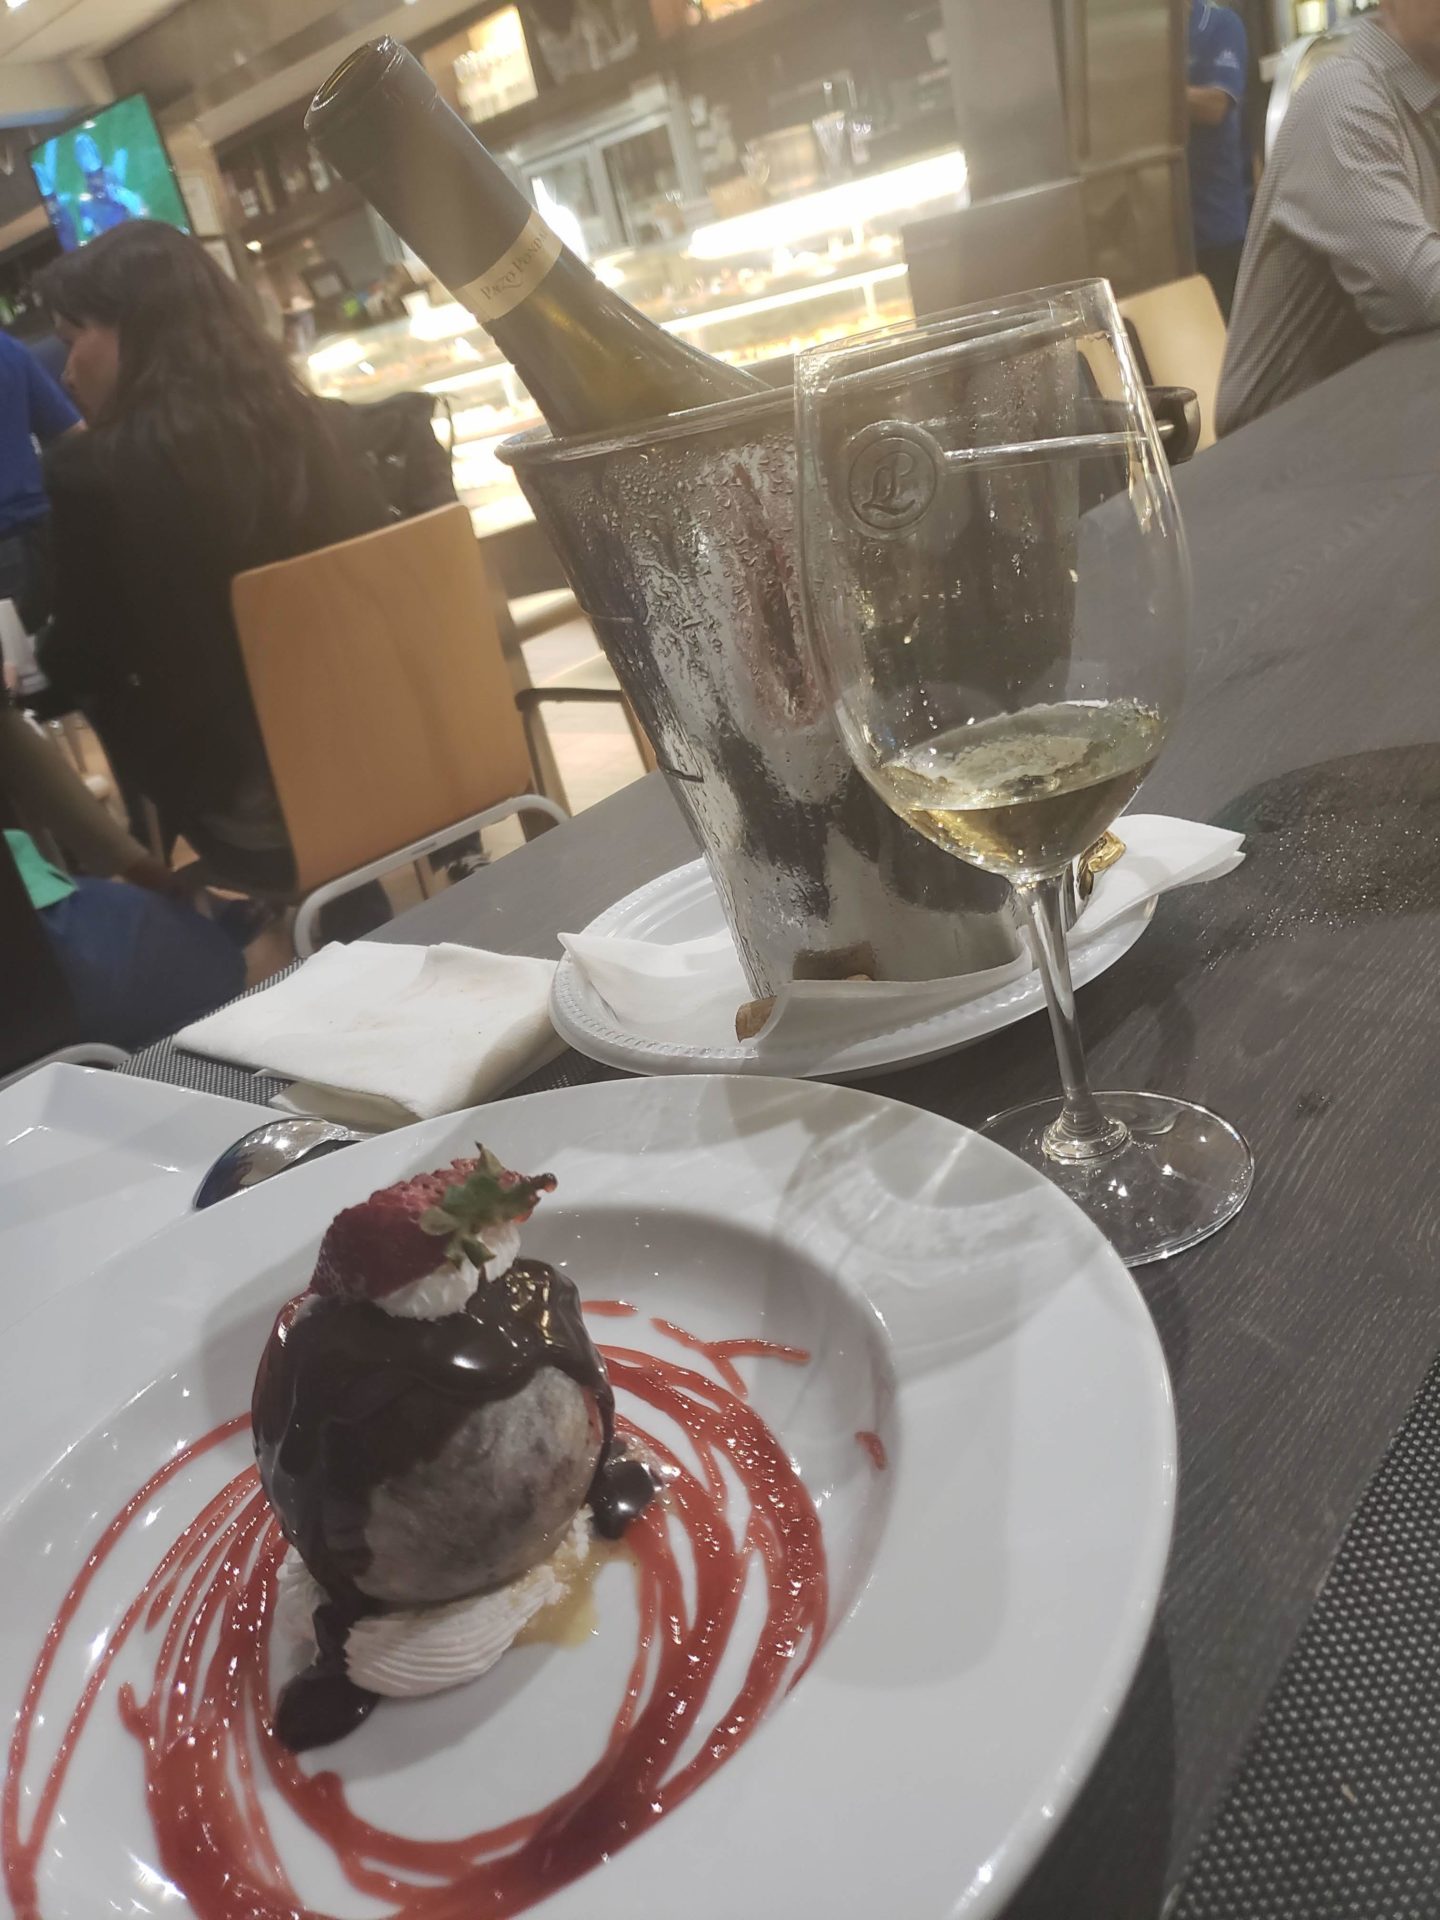 a plate of ice cream and a glass of wine